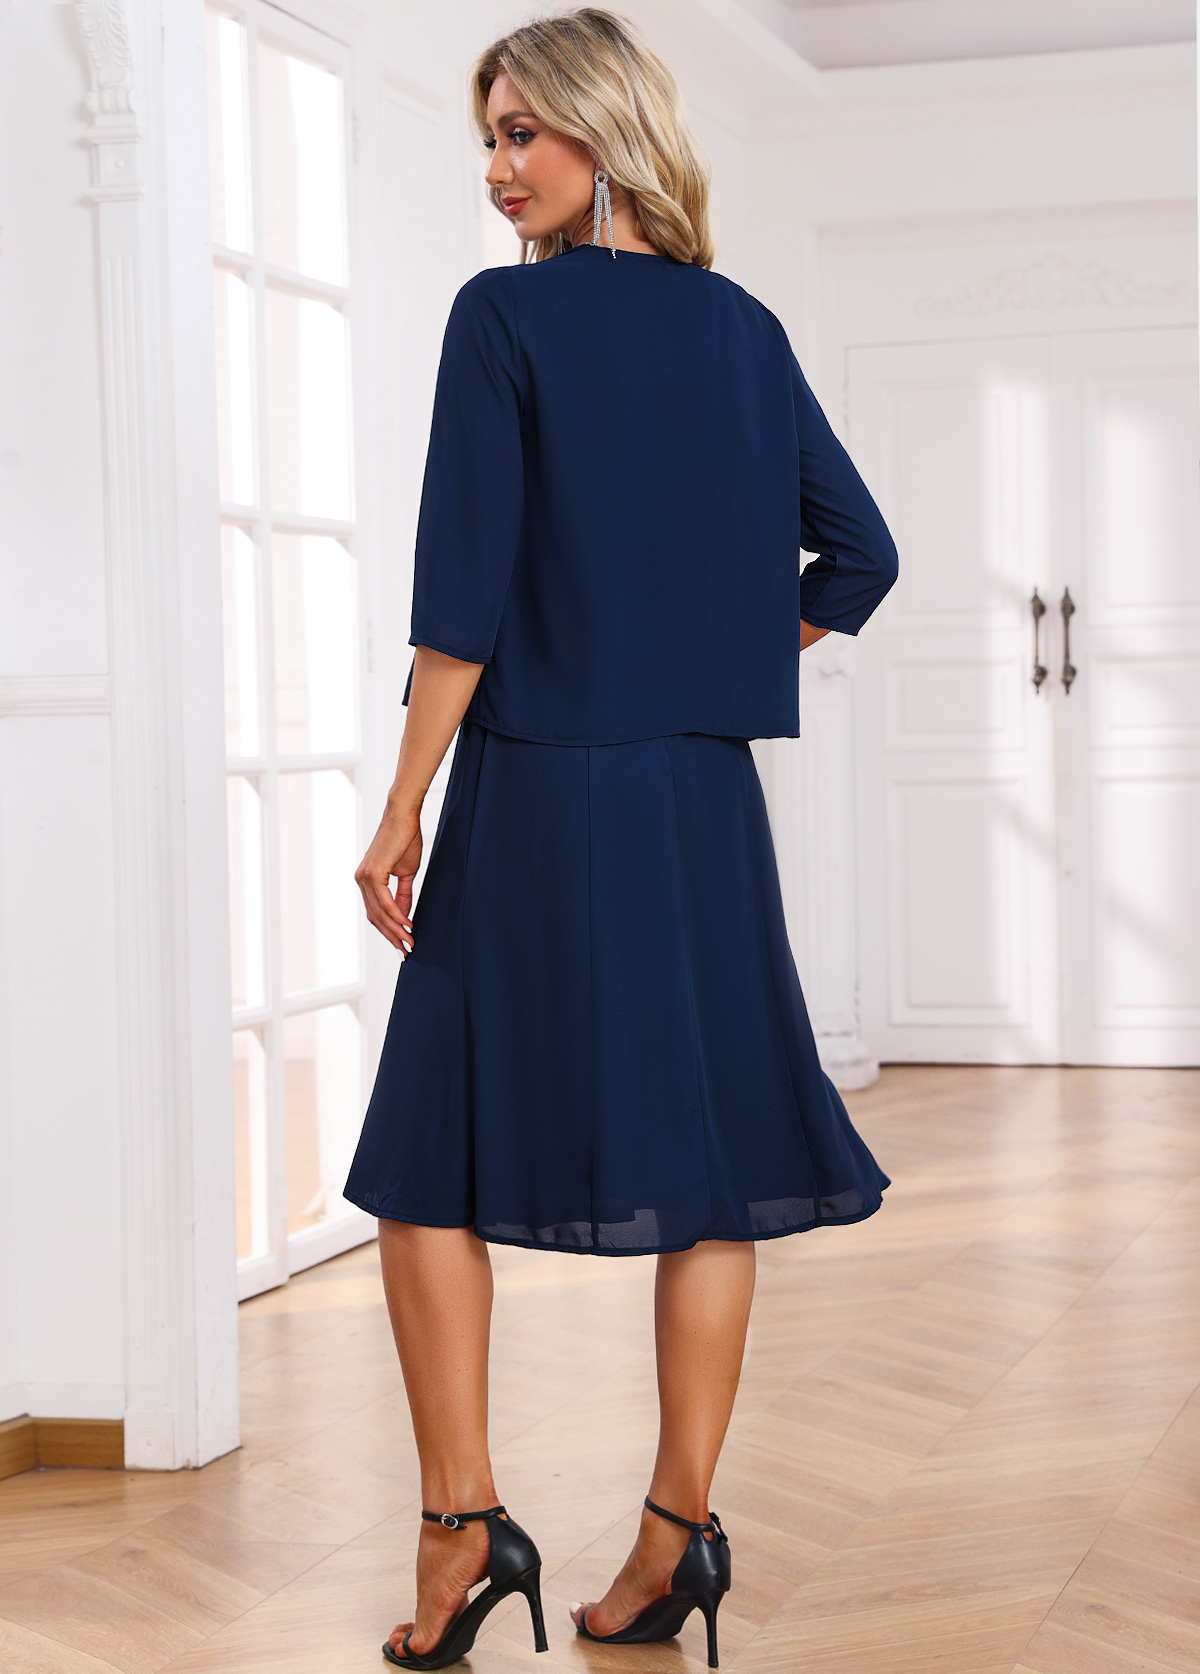 Two Piece Boat Neck Navy Dress and Cardigan